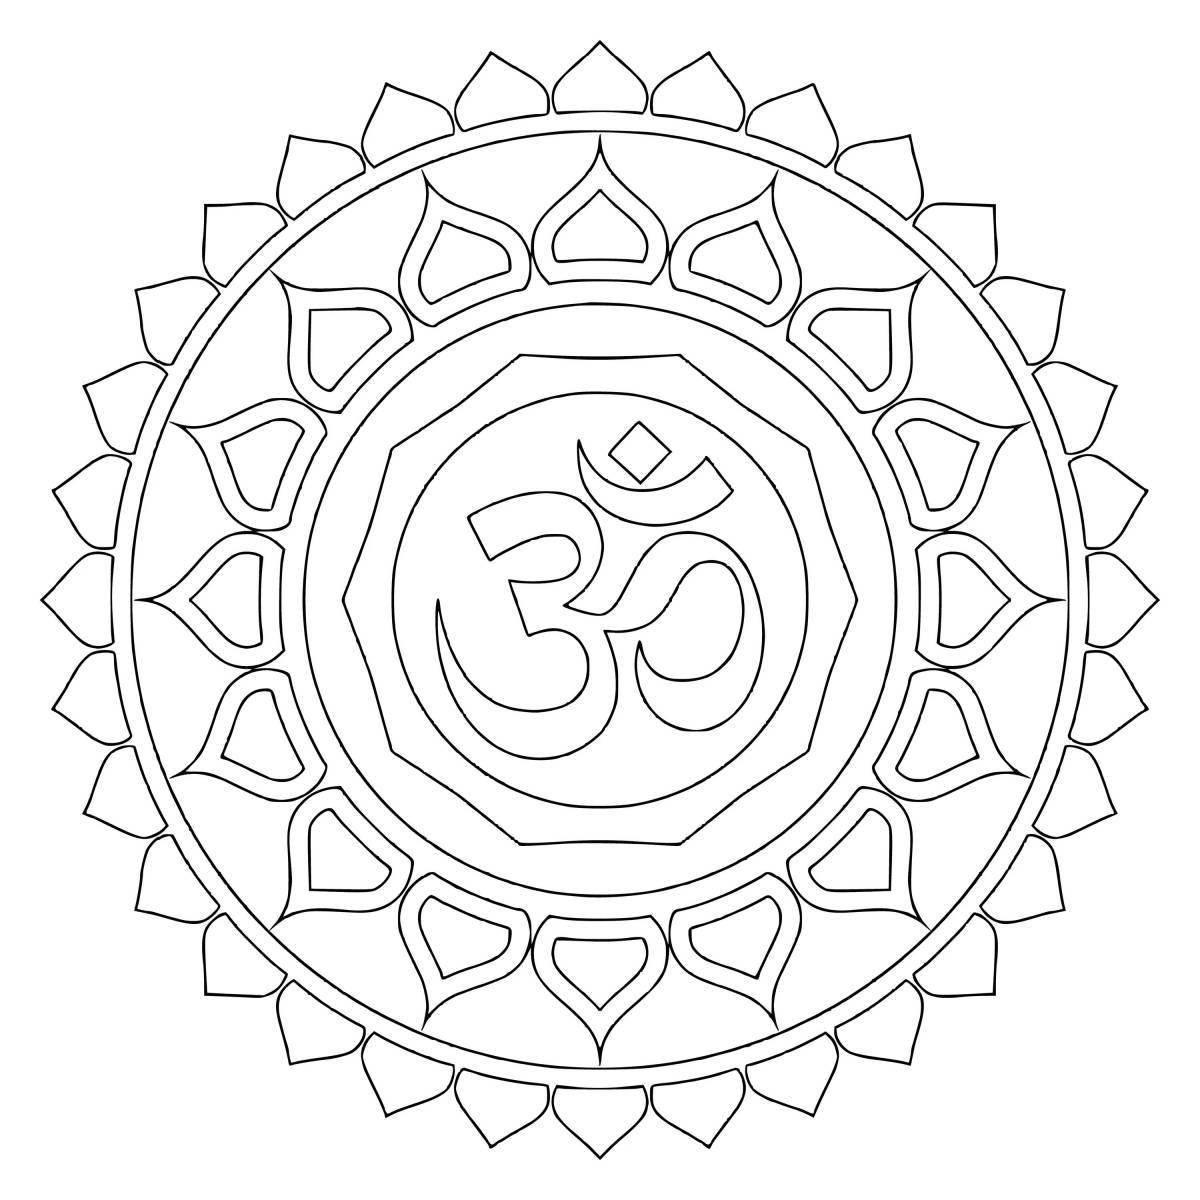 Elegant mantra coloring pages